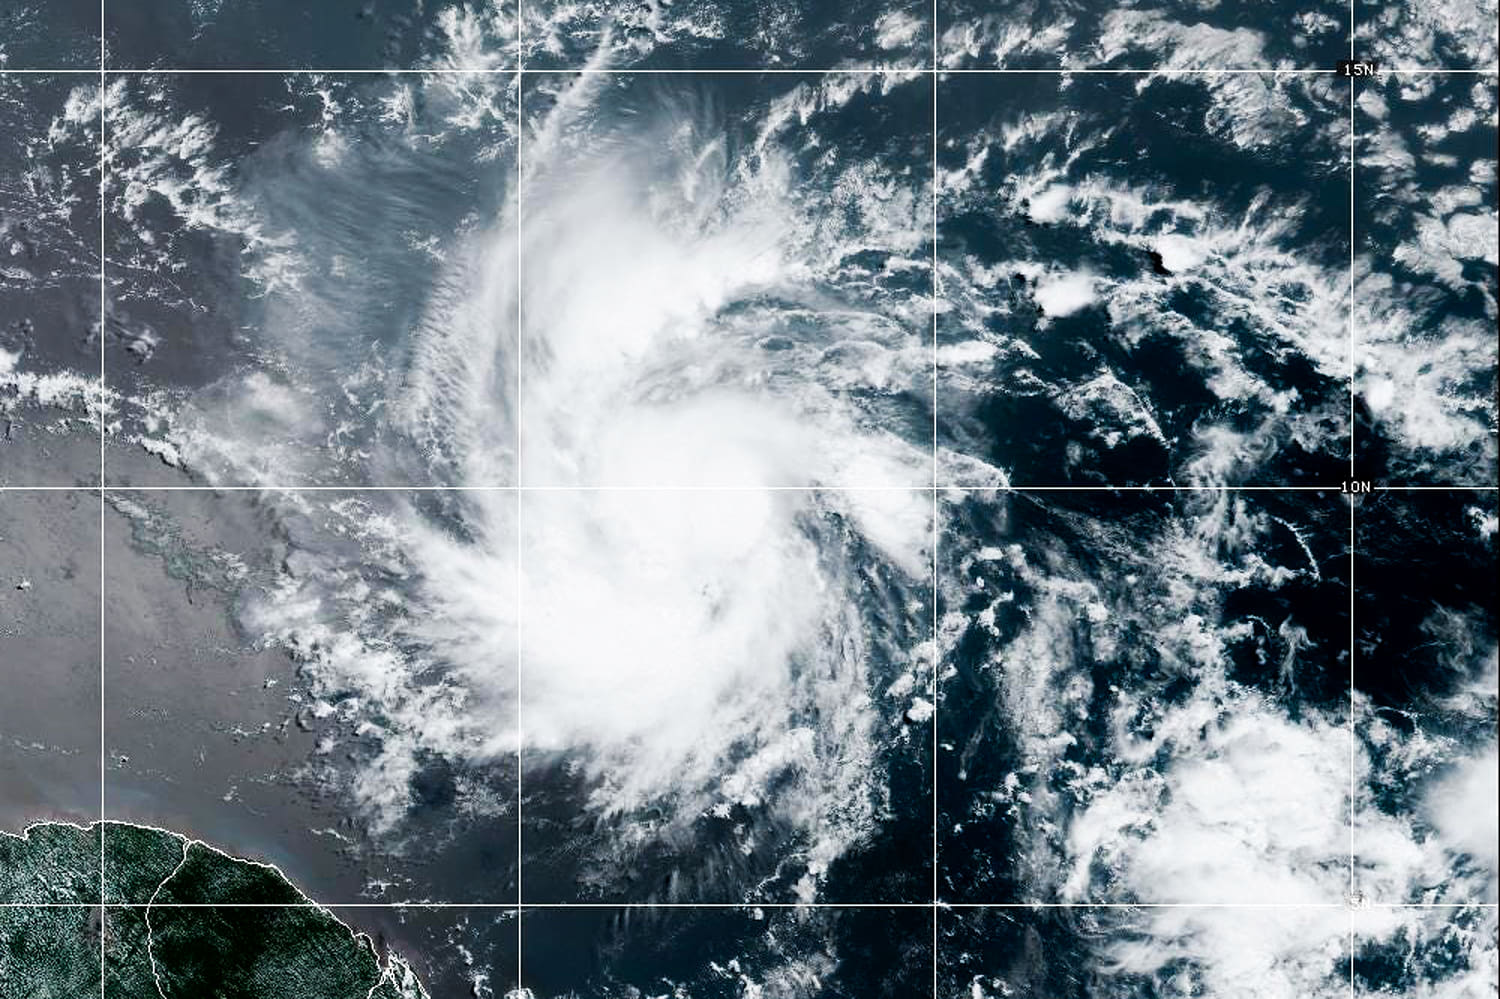 Beryl becomes major hurricane forecast to bring life-threatening conditions to the Caribbean